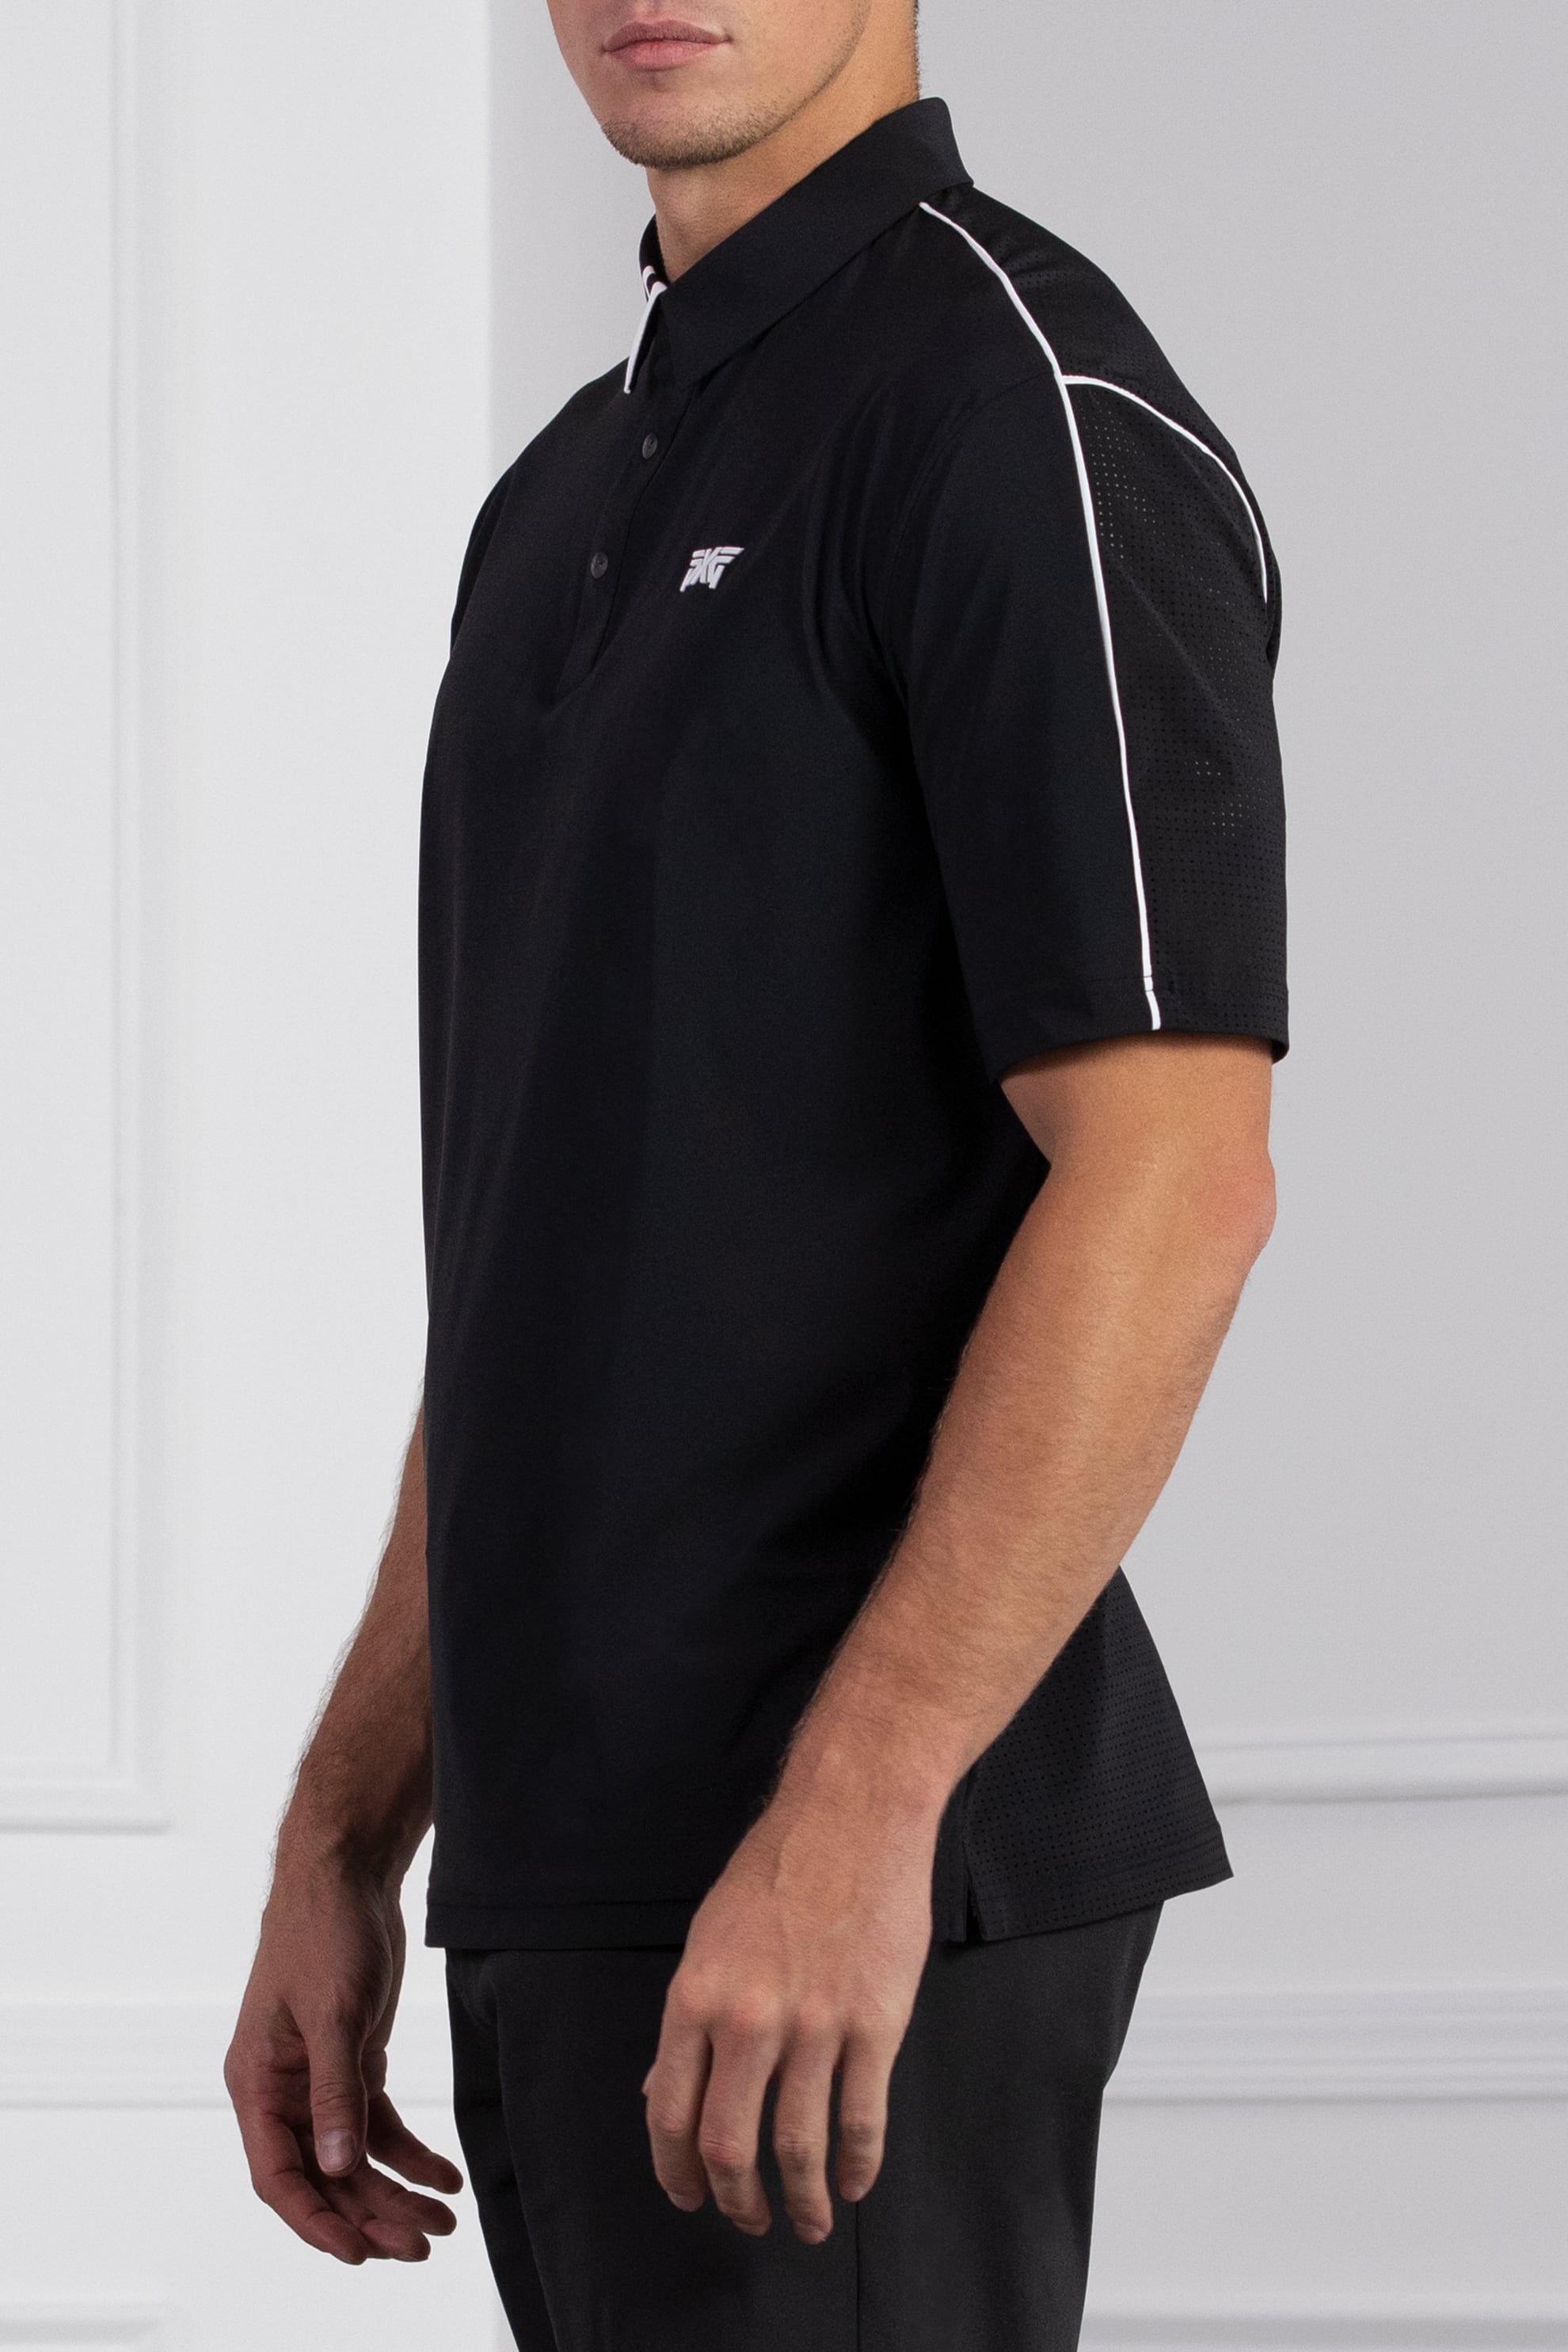 Polo | Golf Gear, at Shop Golf PXG the Clubs and Fineline Fit Highest Apparel, Accessories Quality Comfort